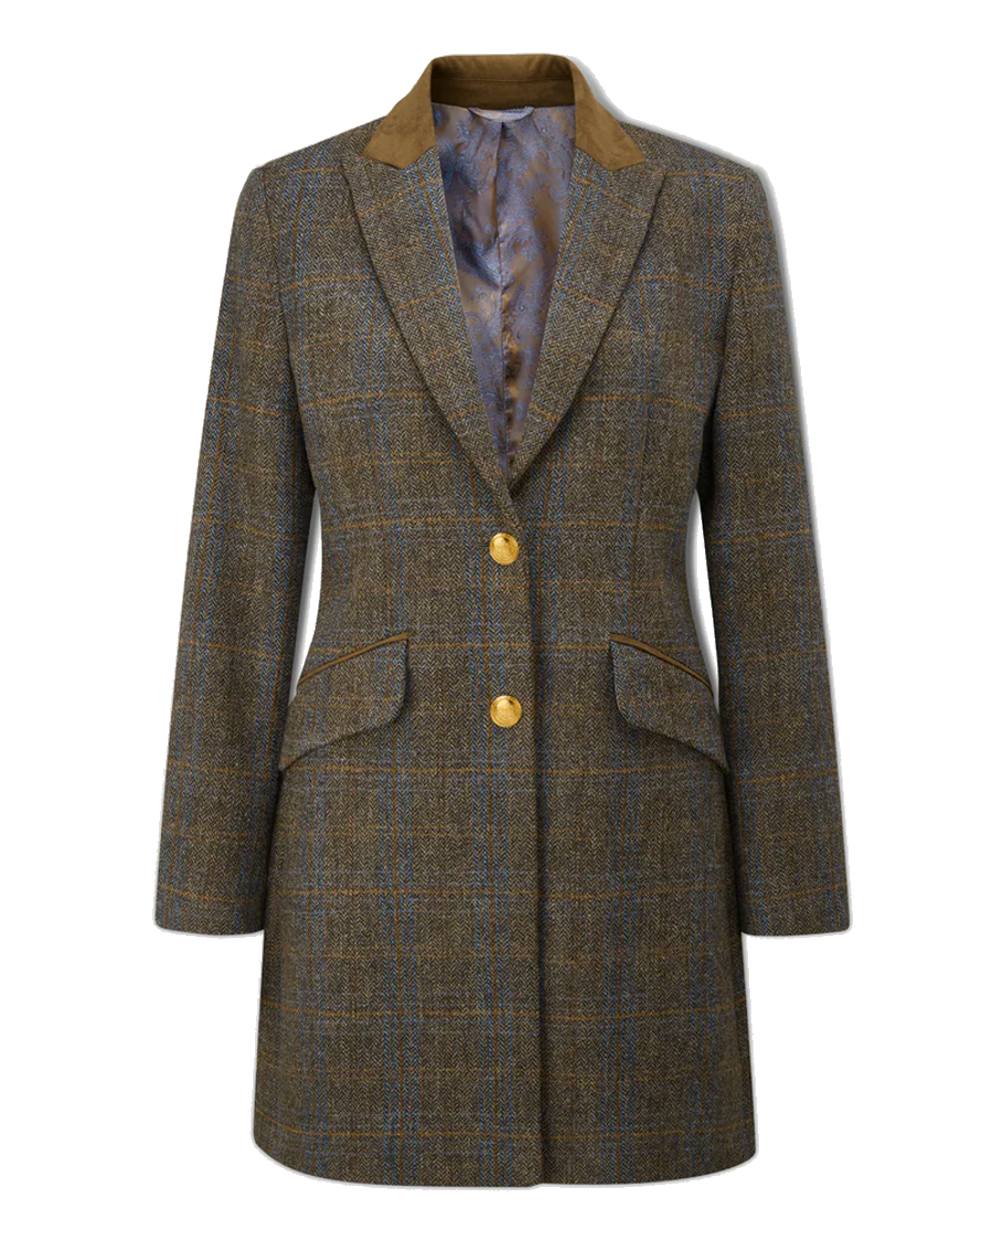 Alan Paine Surrey Mid-Thigh Tweed Coat in Taupe 